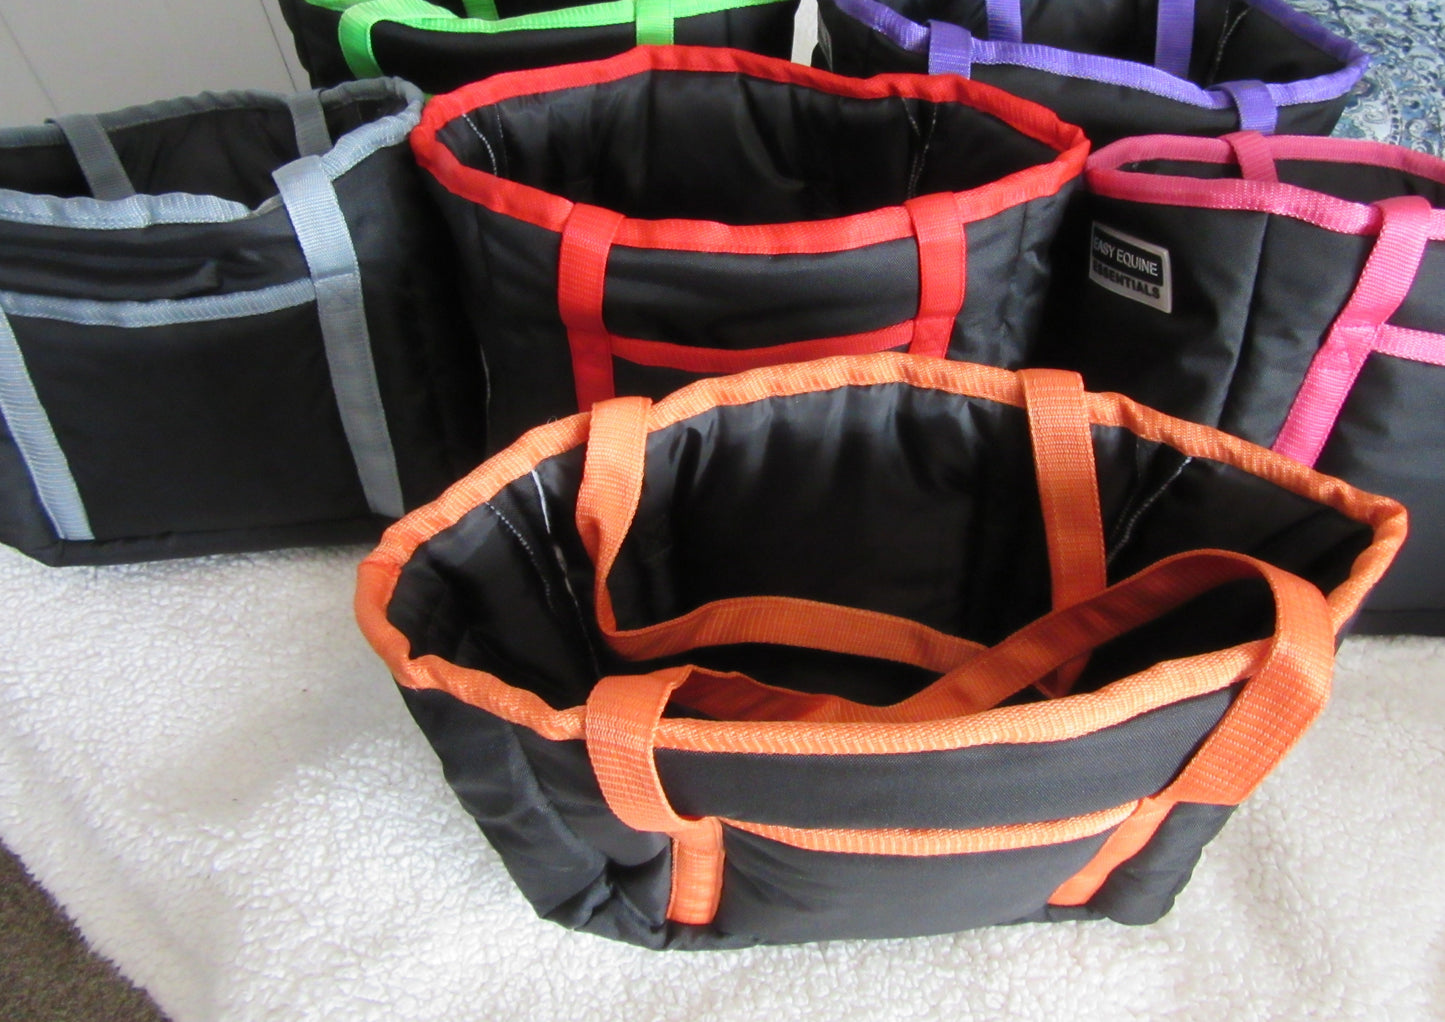 Easy Equine  Essentials Groom Bag - PICK YOUR COLOR